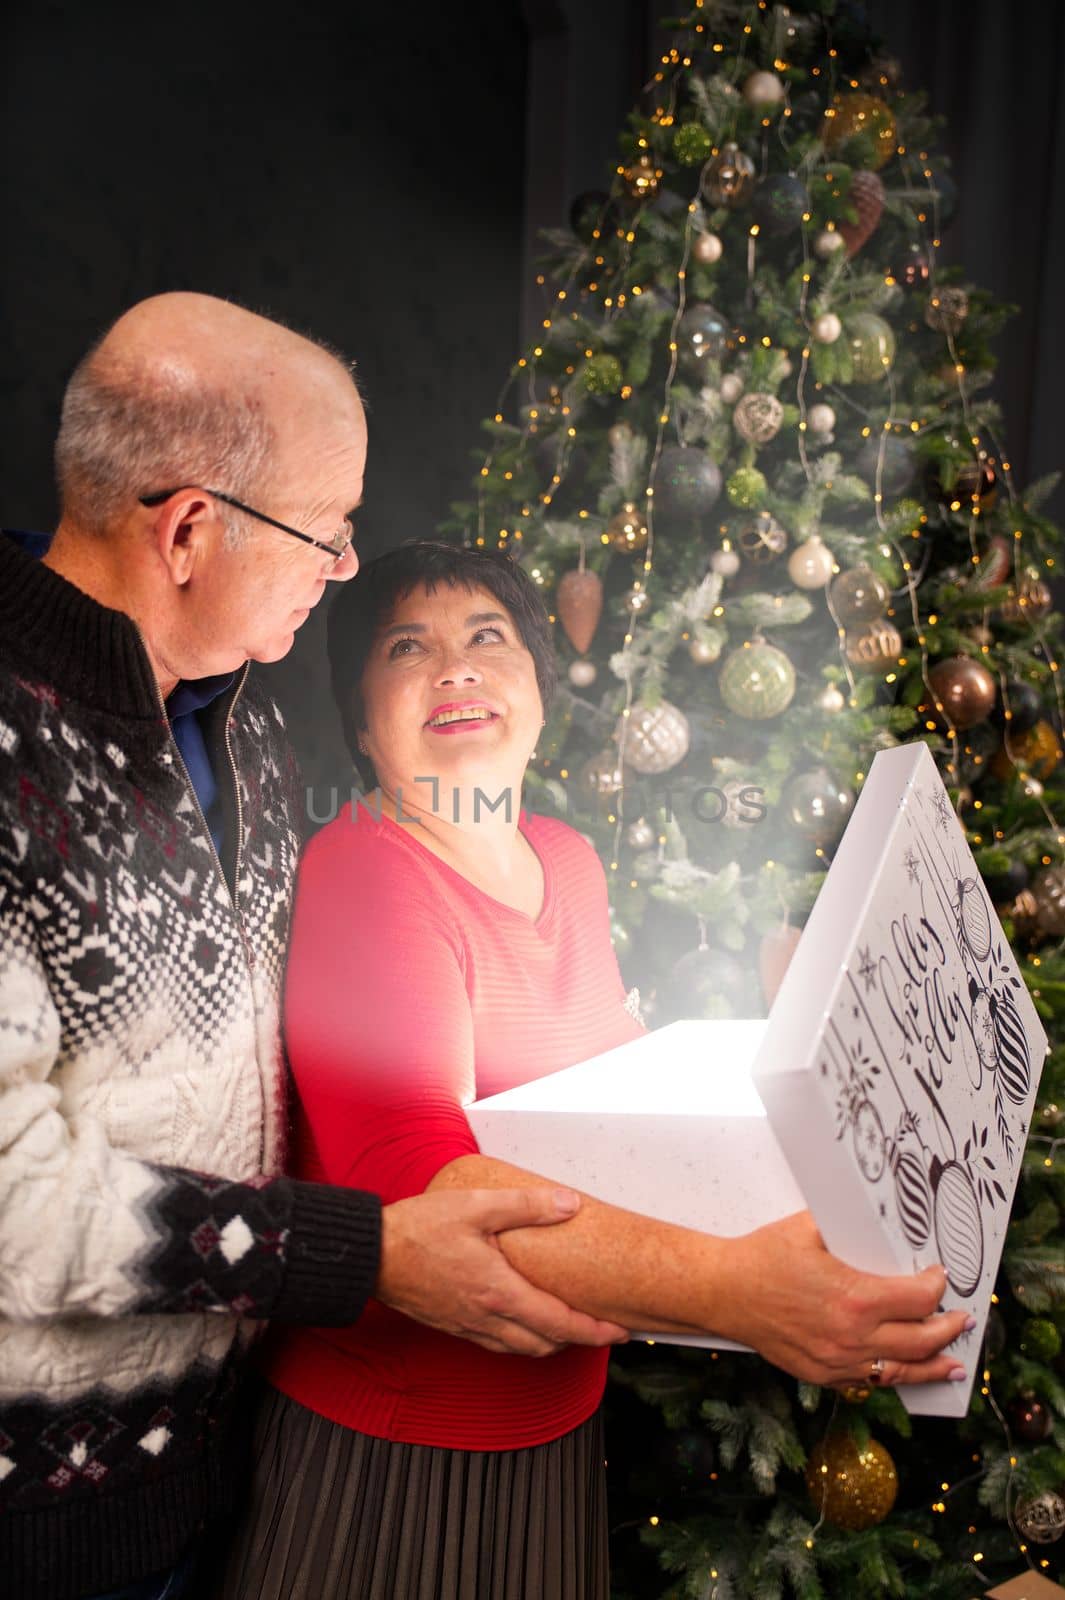 Man 60s giving a Christmas present to his woman. Opening gift box at christmas time. Christmas wonder concept by PhotoTime